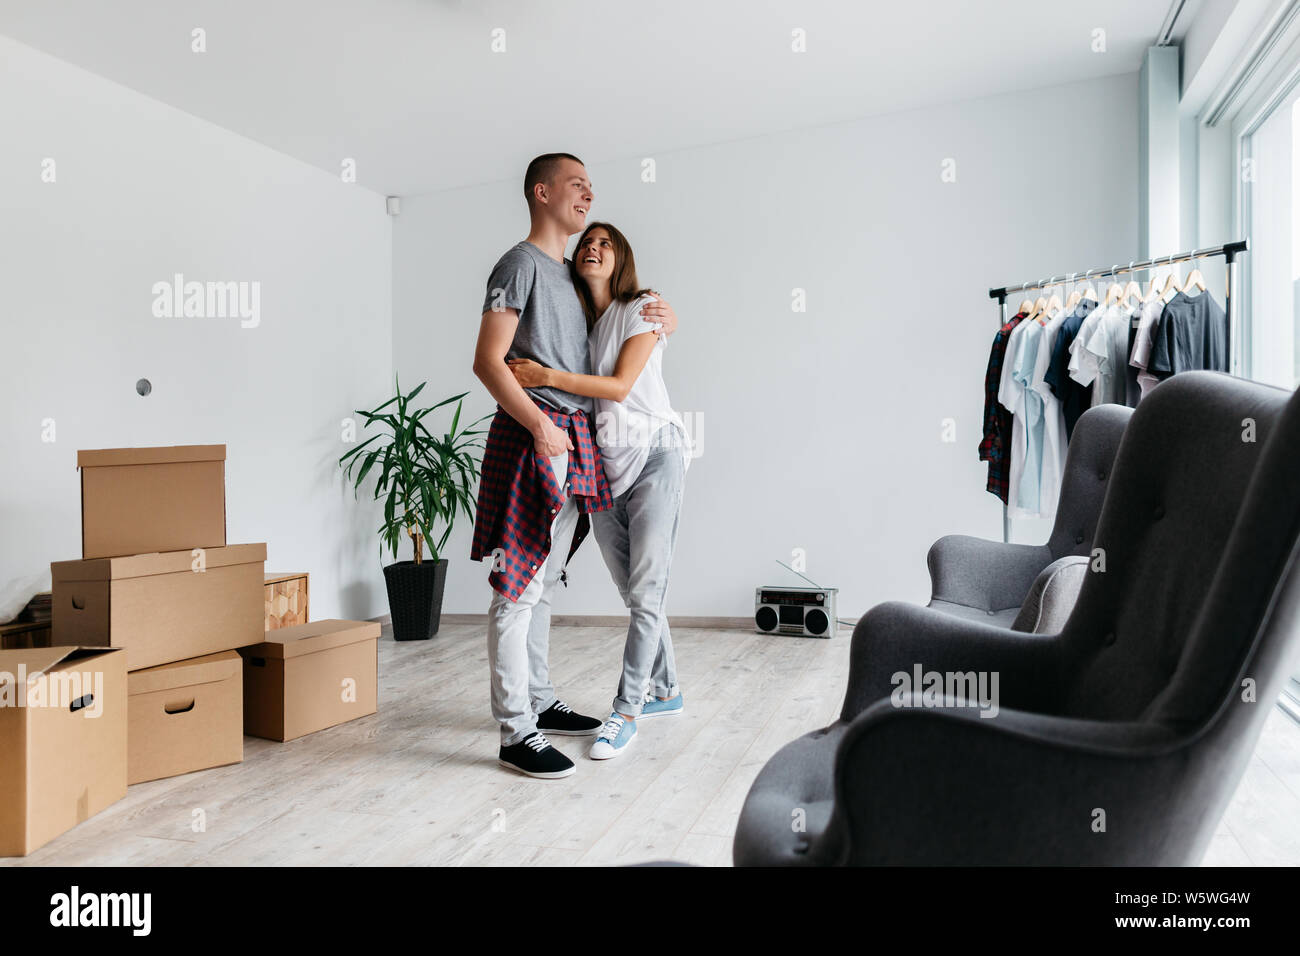 Happy couple hugging together in new house. Moving in together - young cheerful man and woman cuddling in room with cardboard boxes. Stock Photo